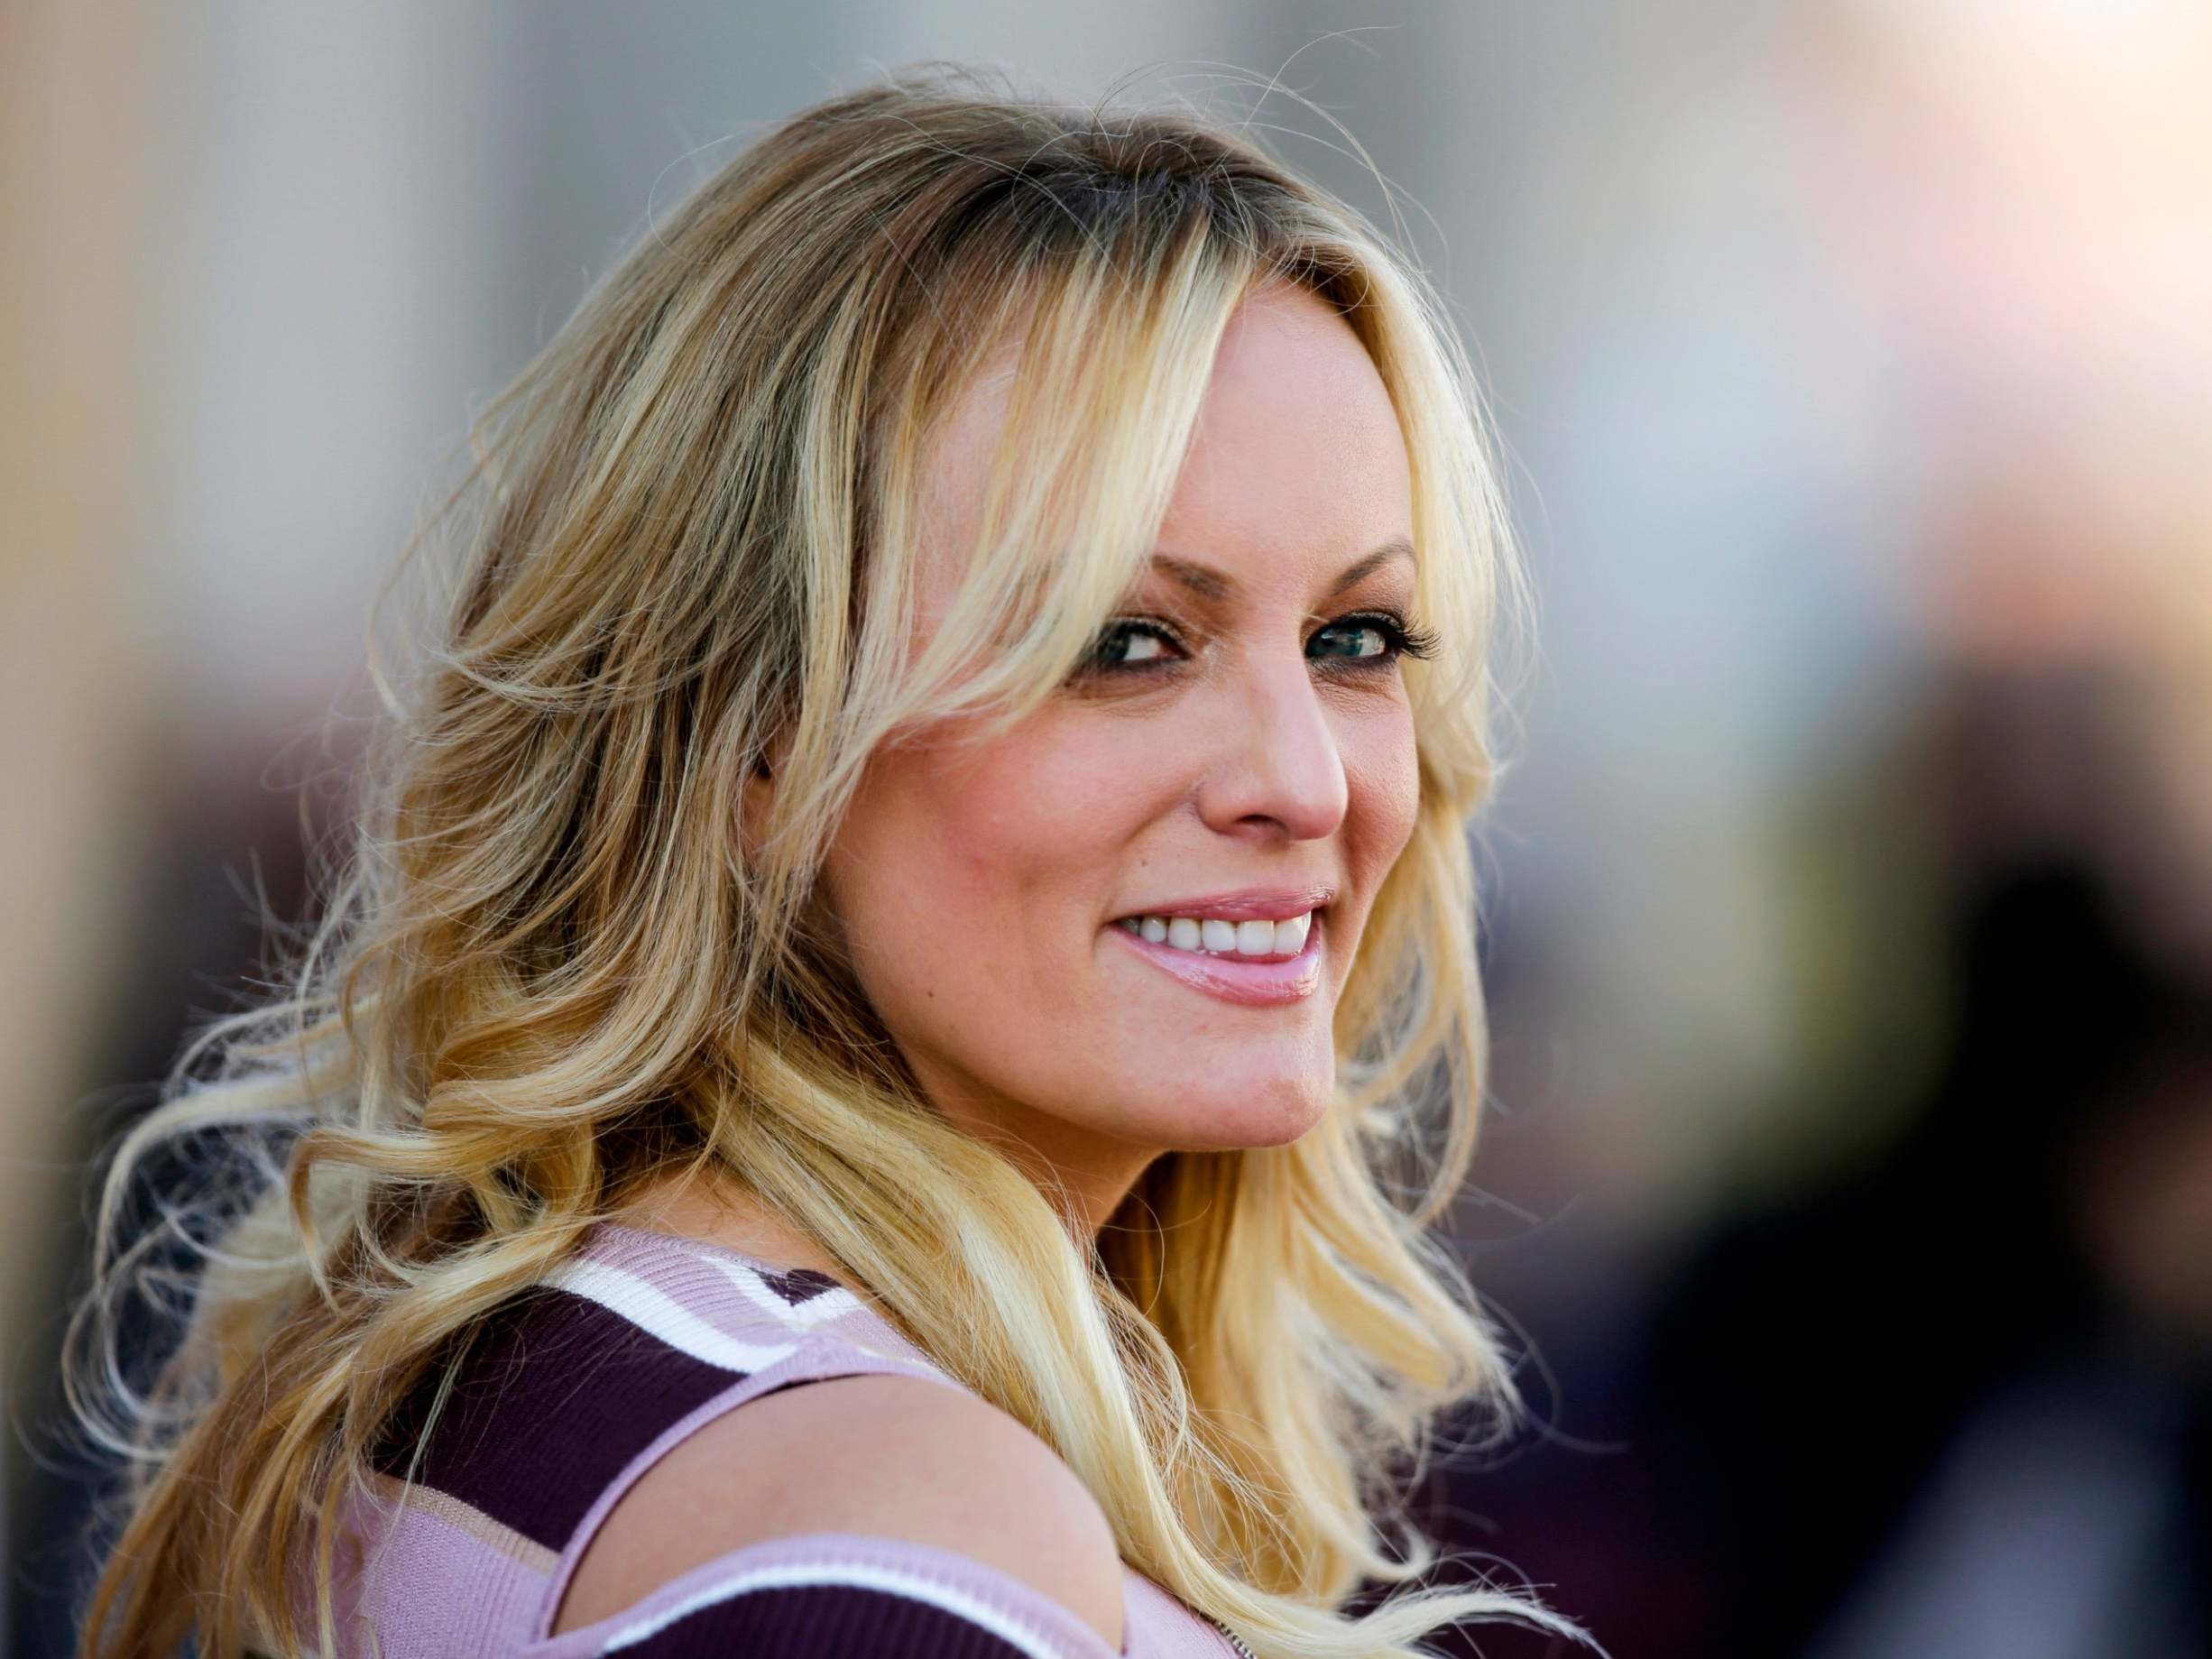 Stormy Daniels said her former attorney strung her along for months about a $300,000 book payment